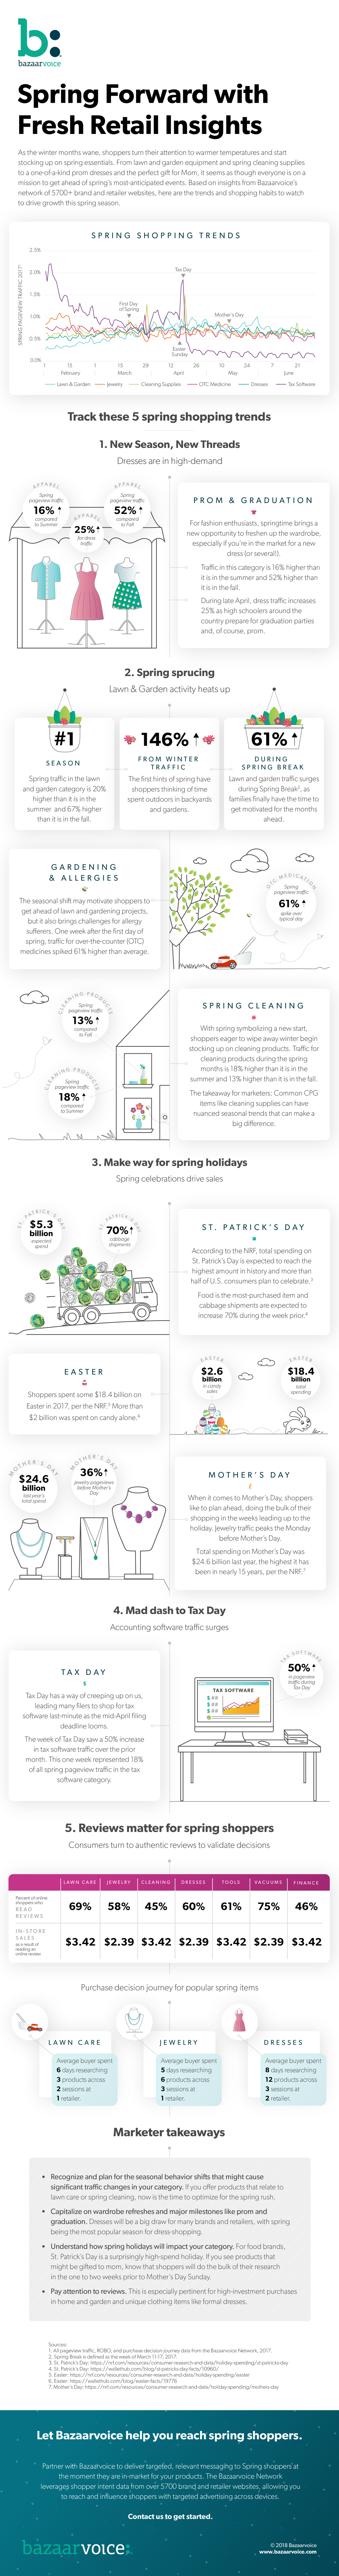 Spring forward with fresh retail insights